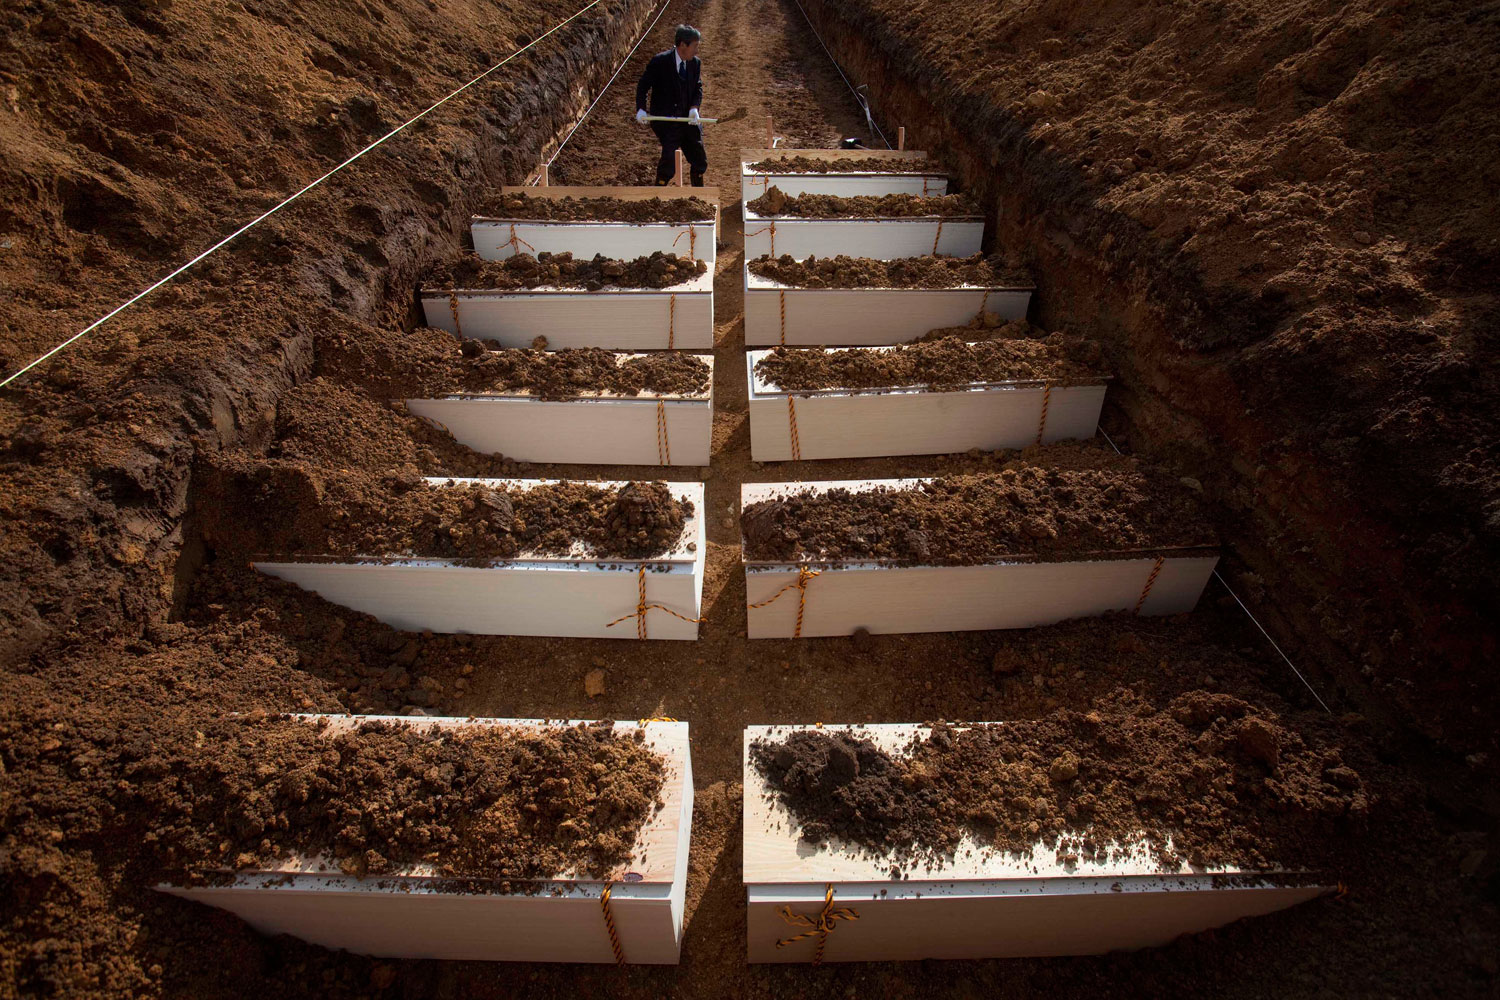 A Japanese funeral parlor worker shovels dirt on to coffins containing victims of the march 11 earthquake and tsunami during a mass funeral in Yamamoto, northeastern Japan Saturday, March 26, 2011.